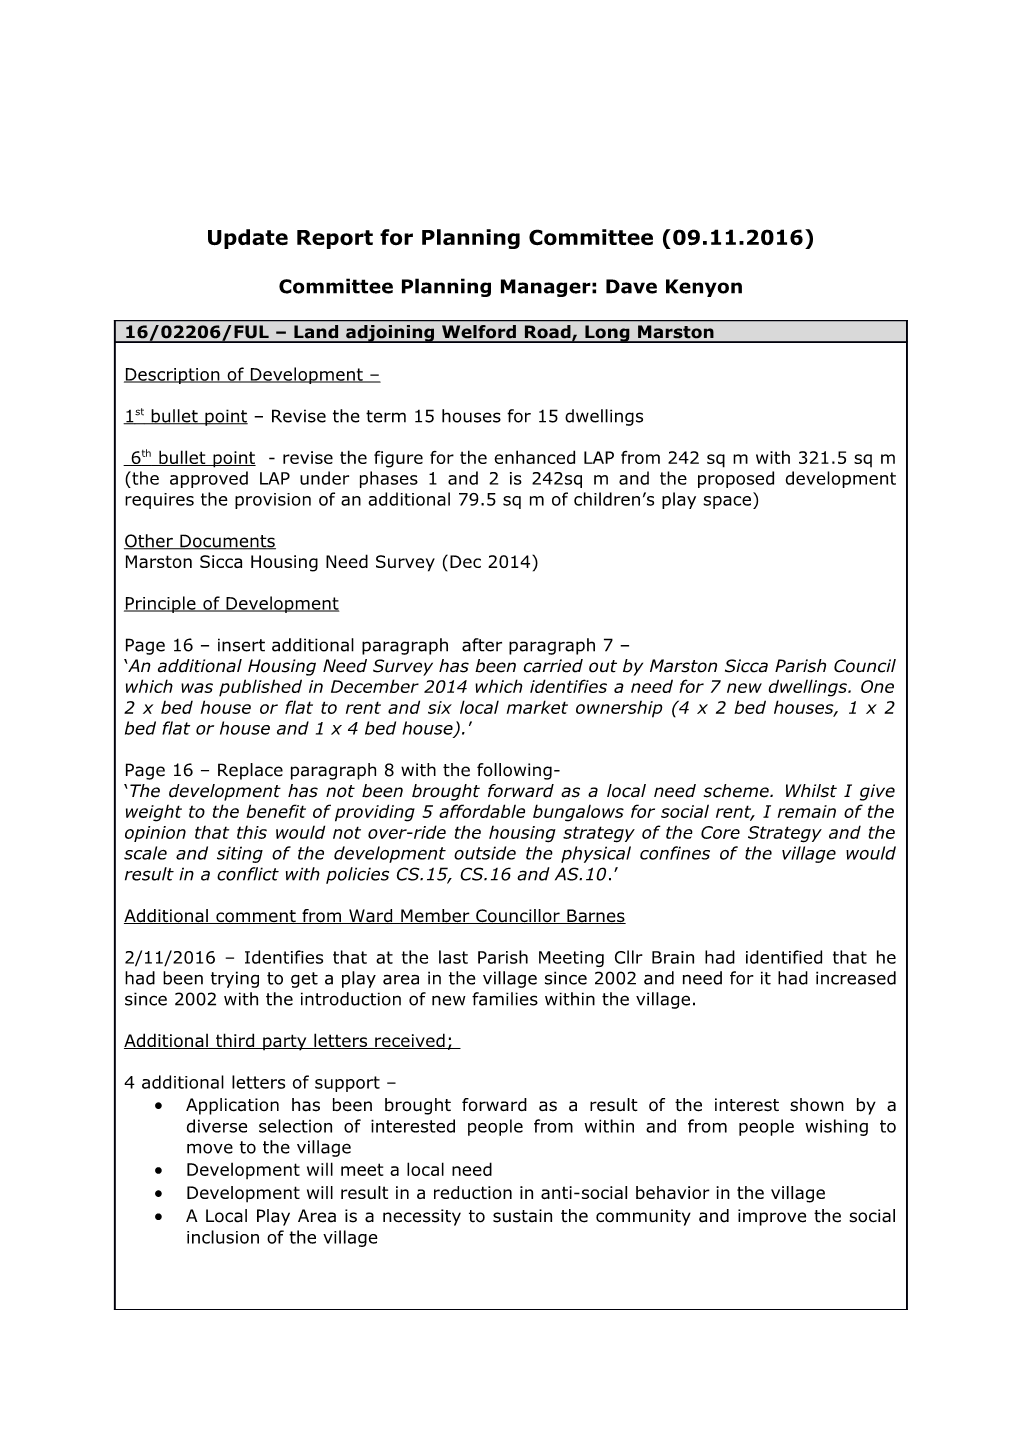 Update Report for Planning Committee (09.11.2016)